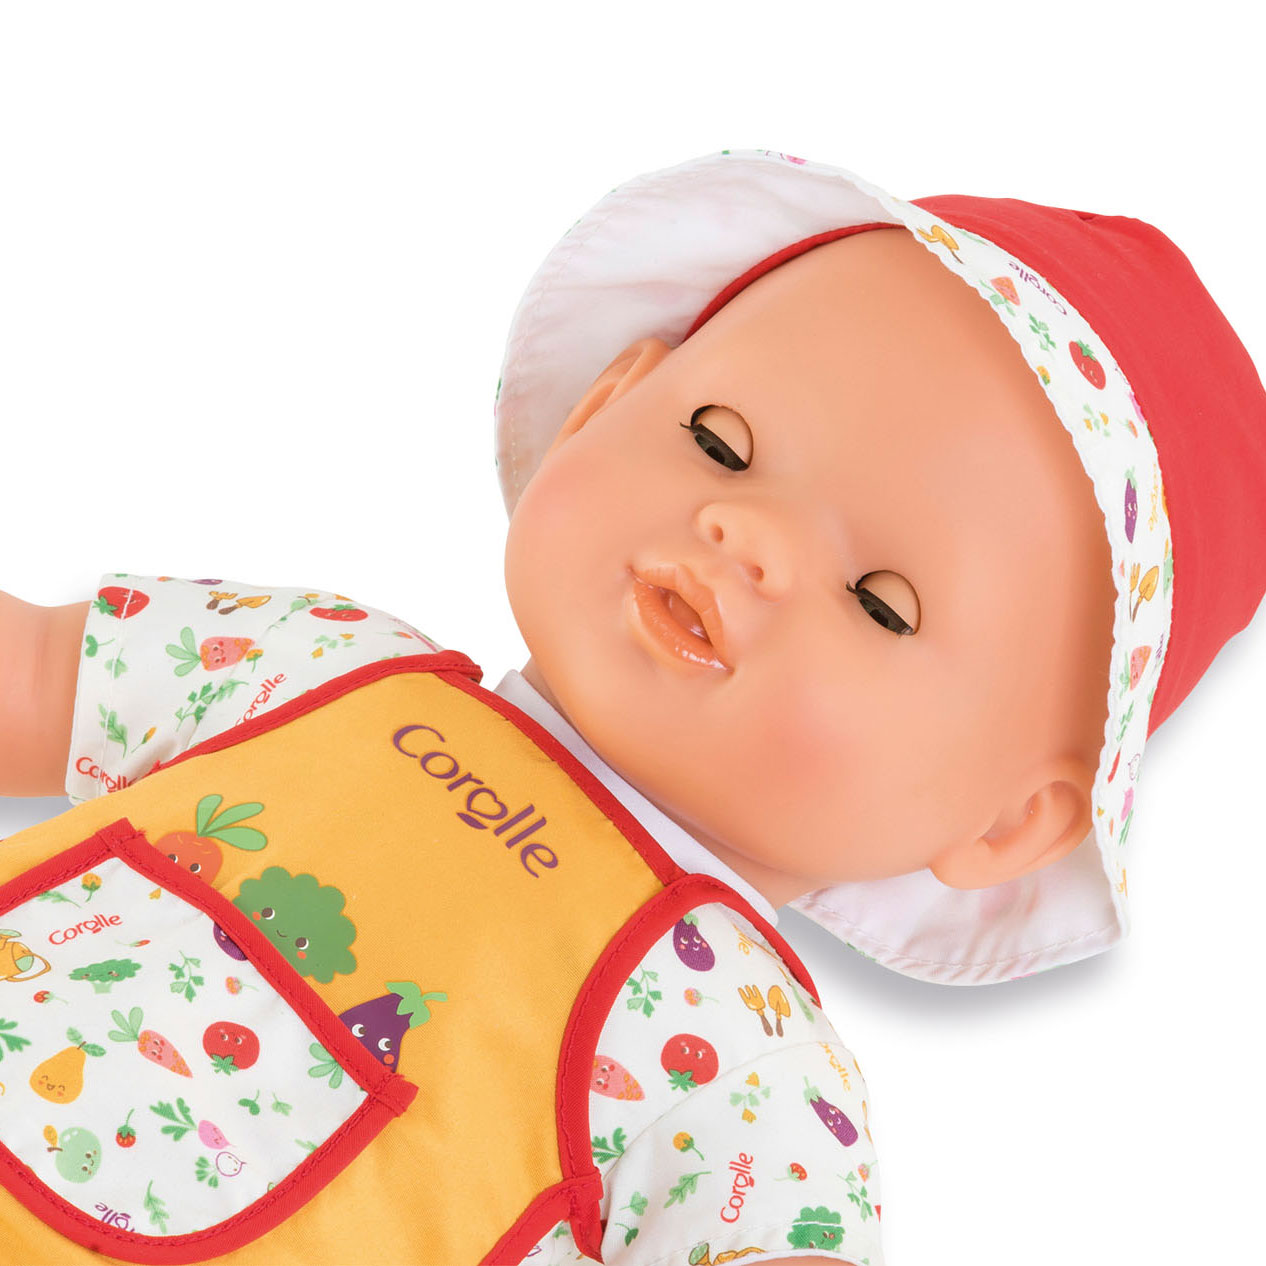 Corolle Mon Grand Poupon Babypuppe – Charly Gardening, 36 cm